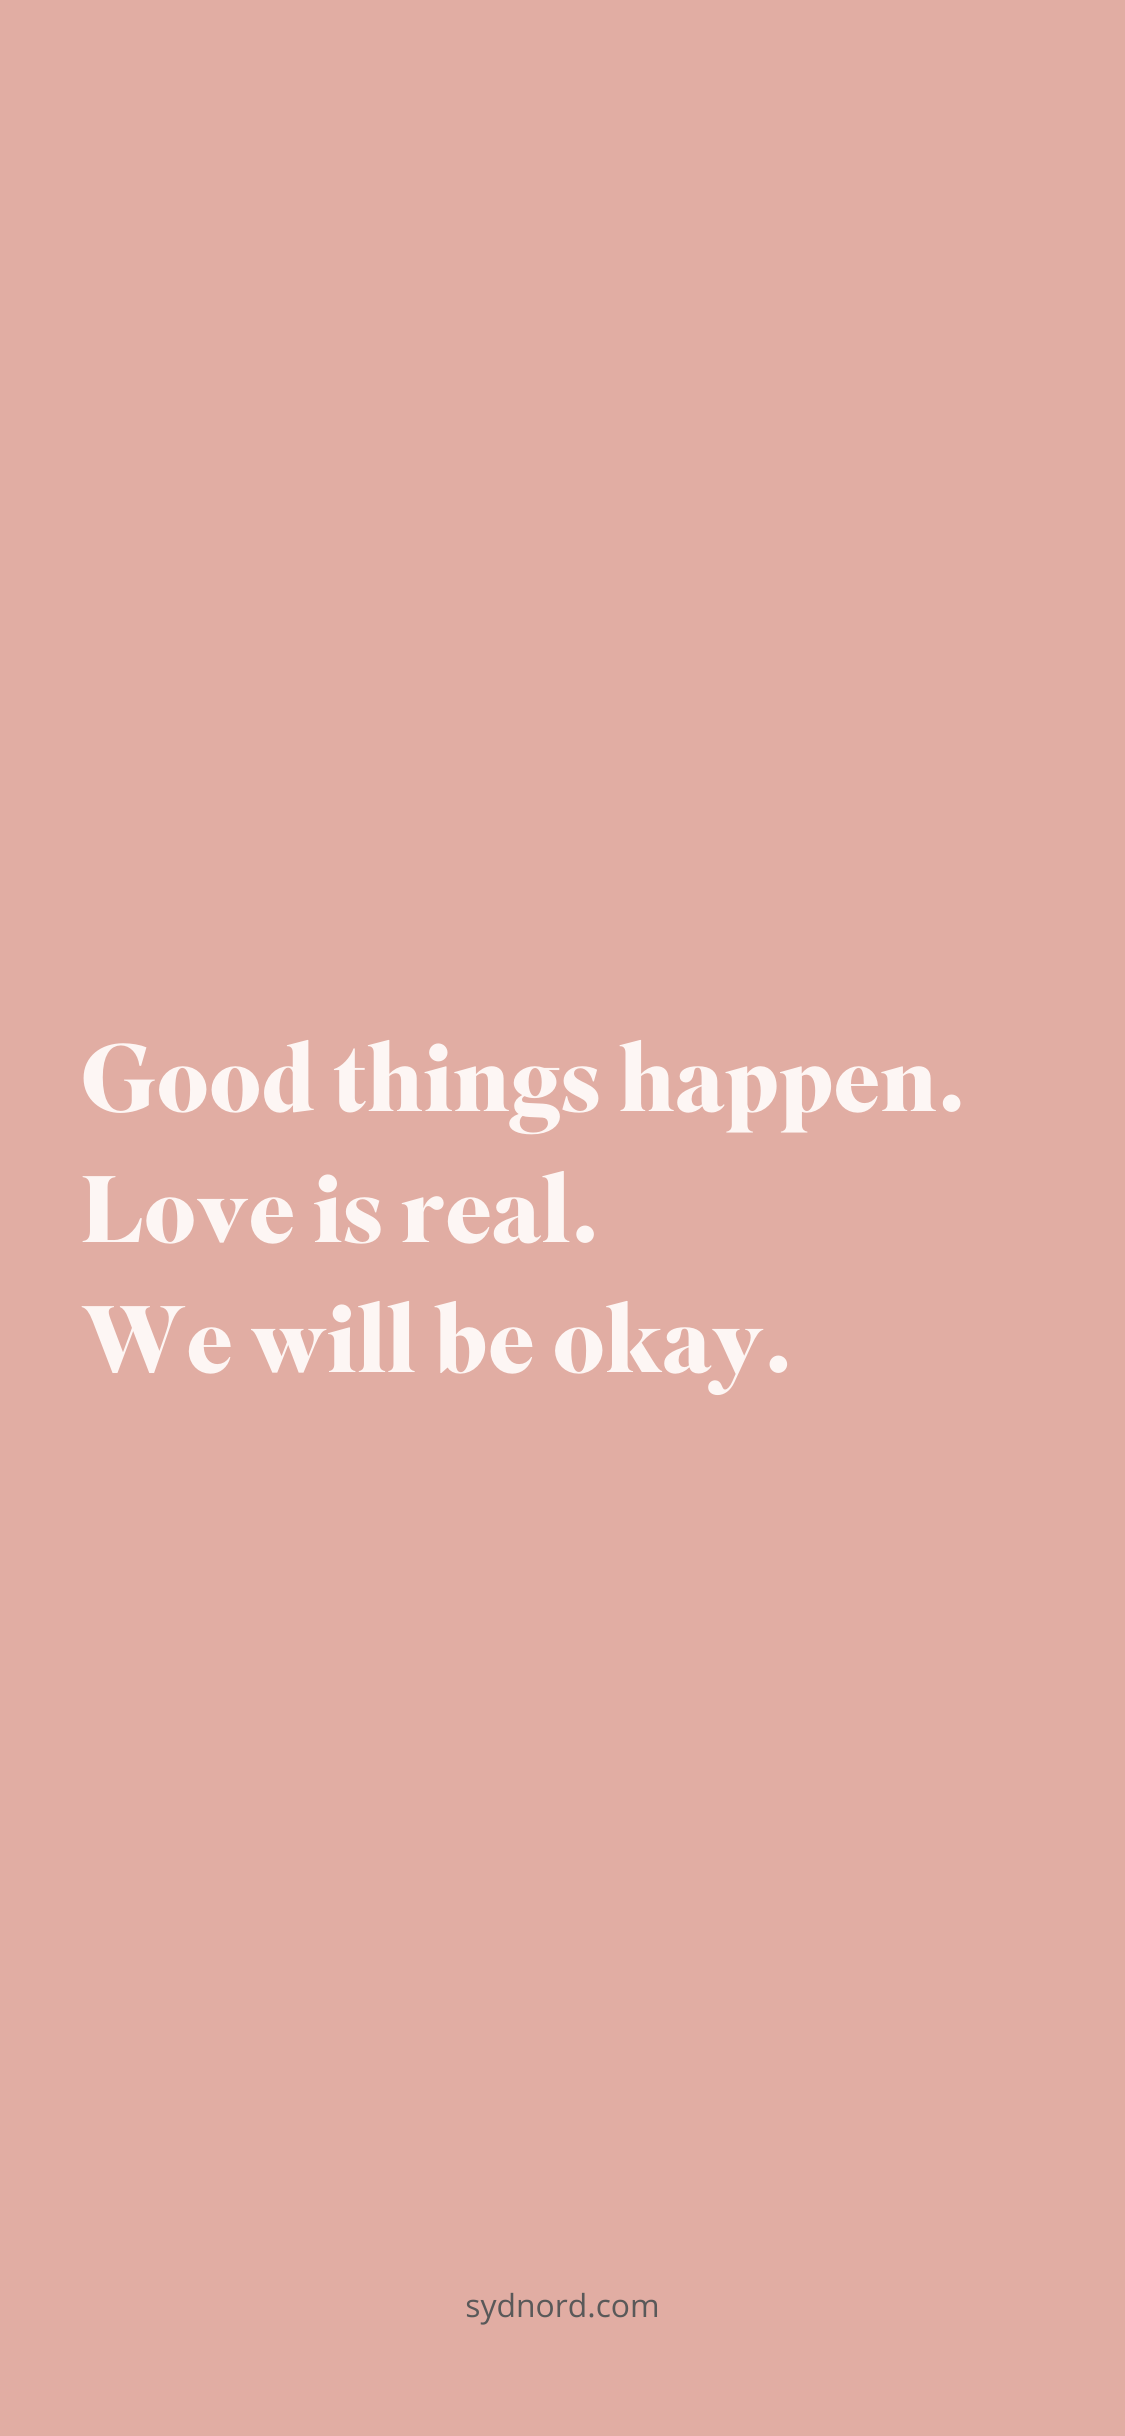 Good things happen. Love is real. We will be okay.